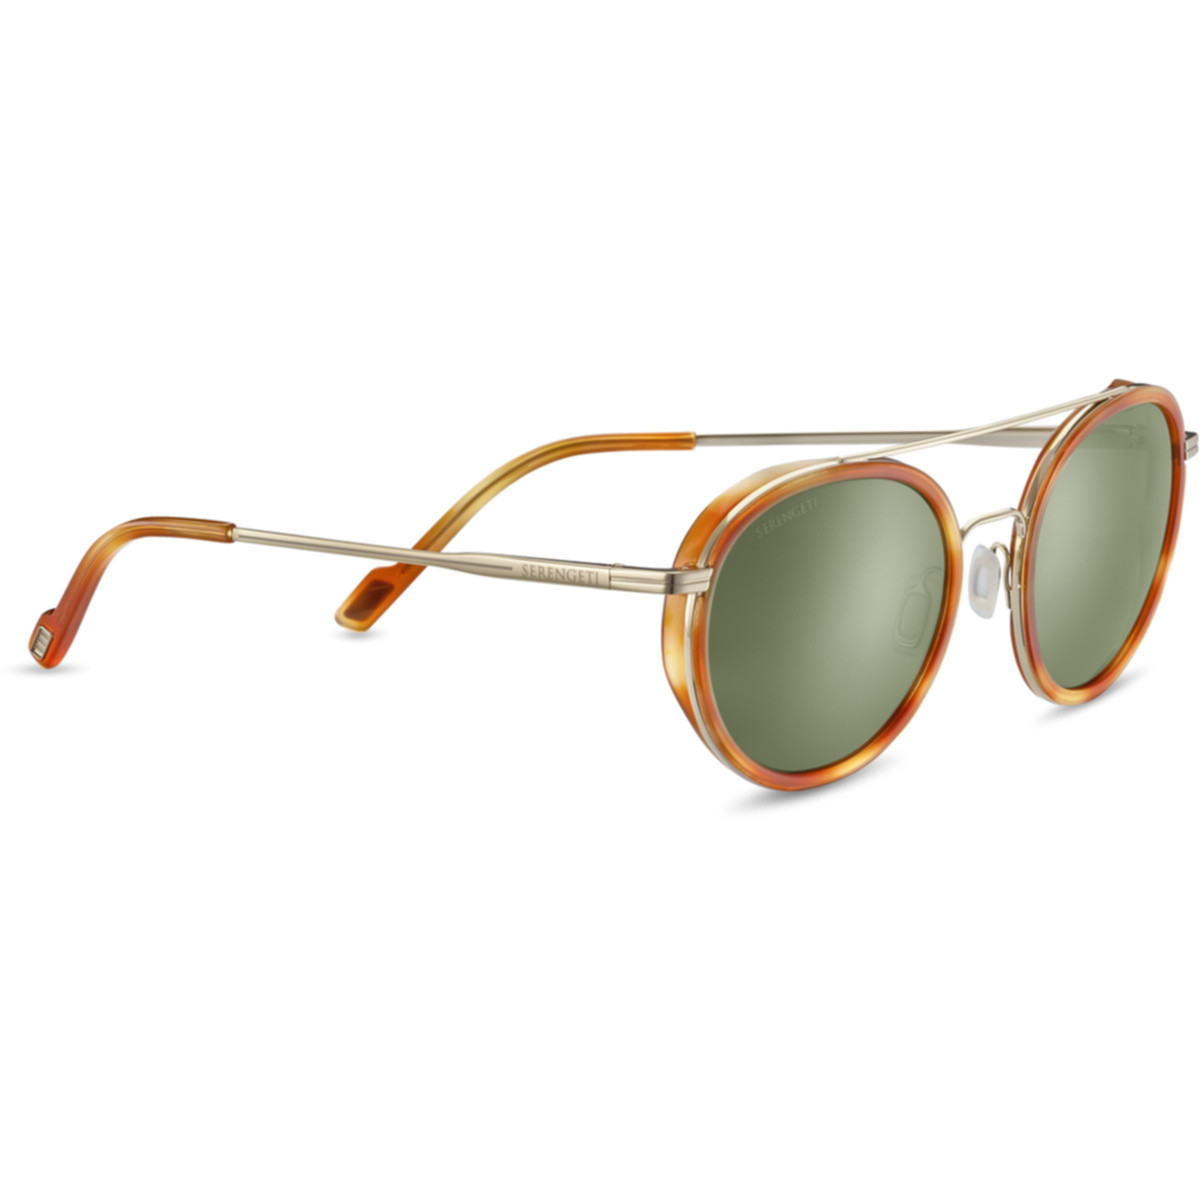 Geary_Light Gold Orange Turtoise Acetate-Mineral Polarized 555nm Cat 3 to 3-01